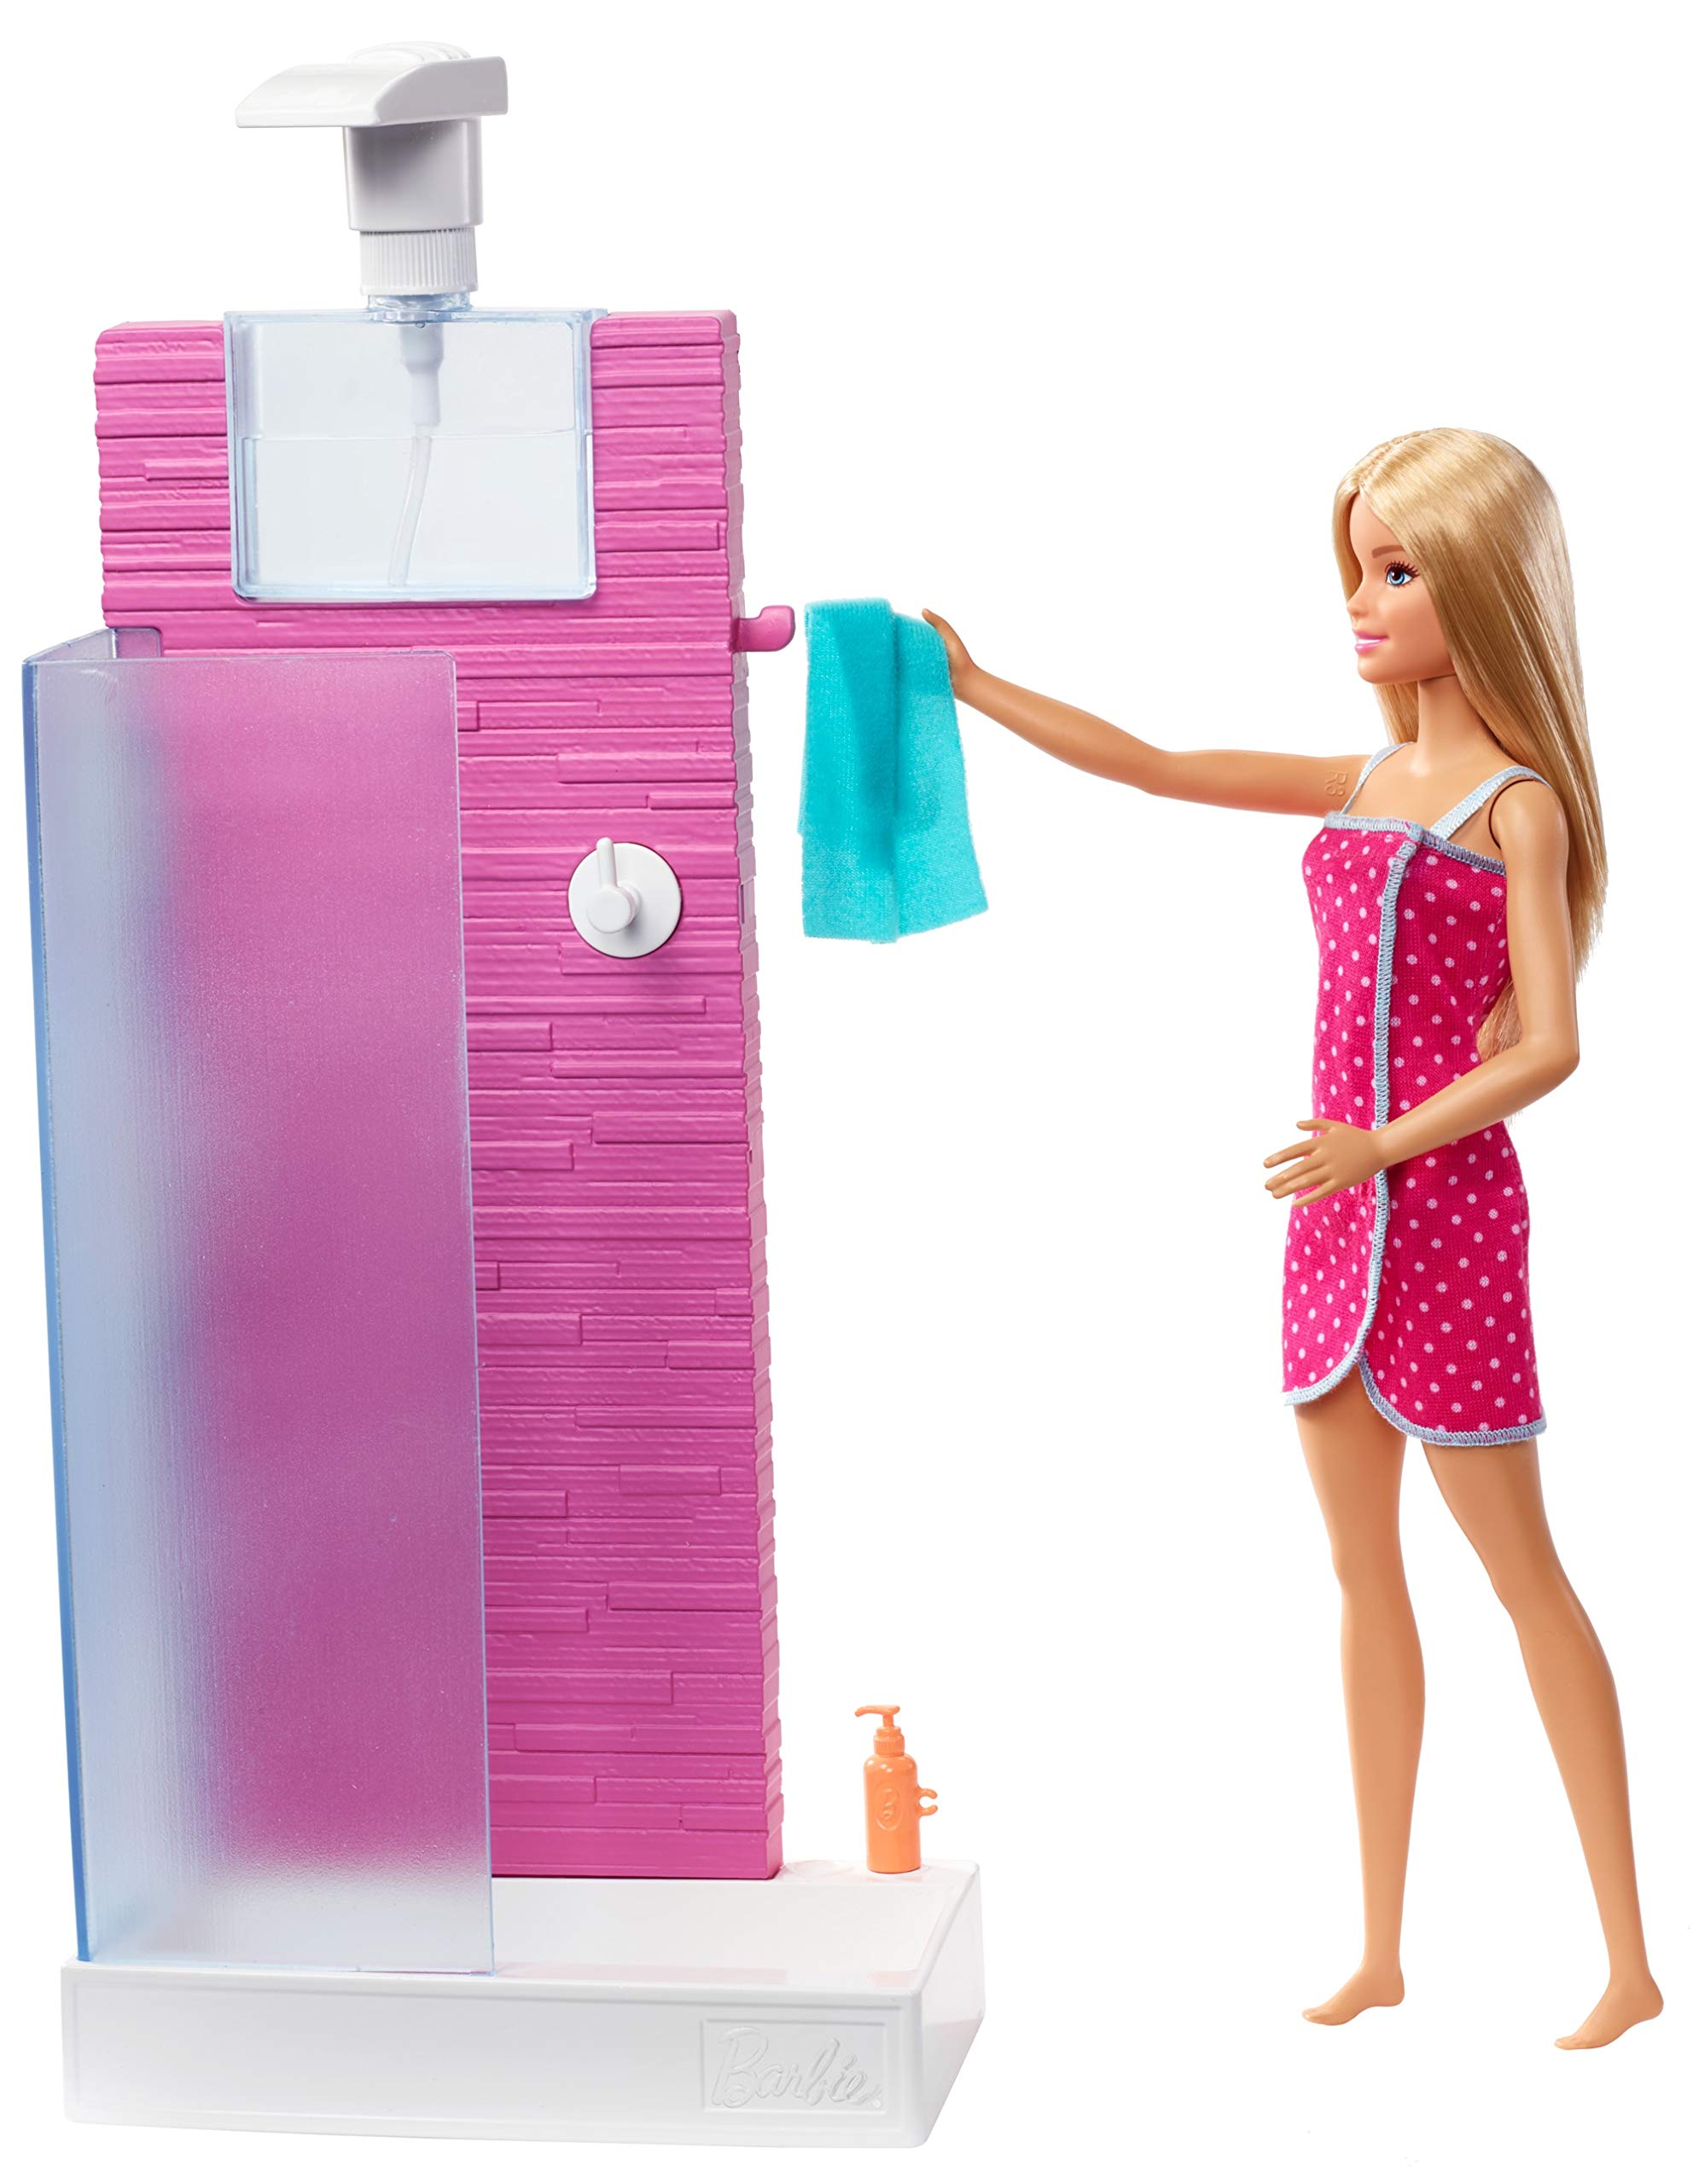 Barbie Doll and Furniture Set, Bathroom with Working Shower and Three Bath Accessories, Gift Set for 3 to 7 Year Olds​​